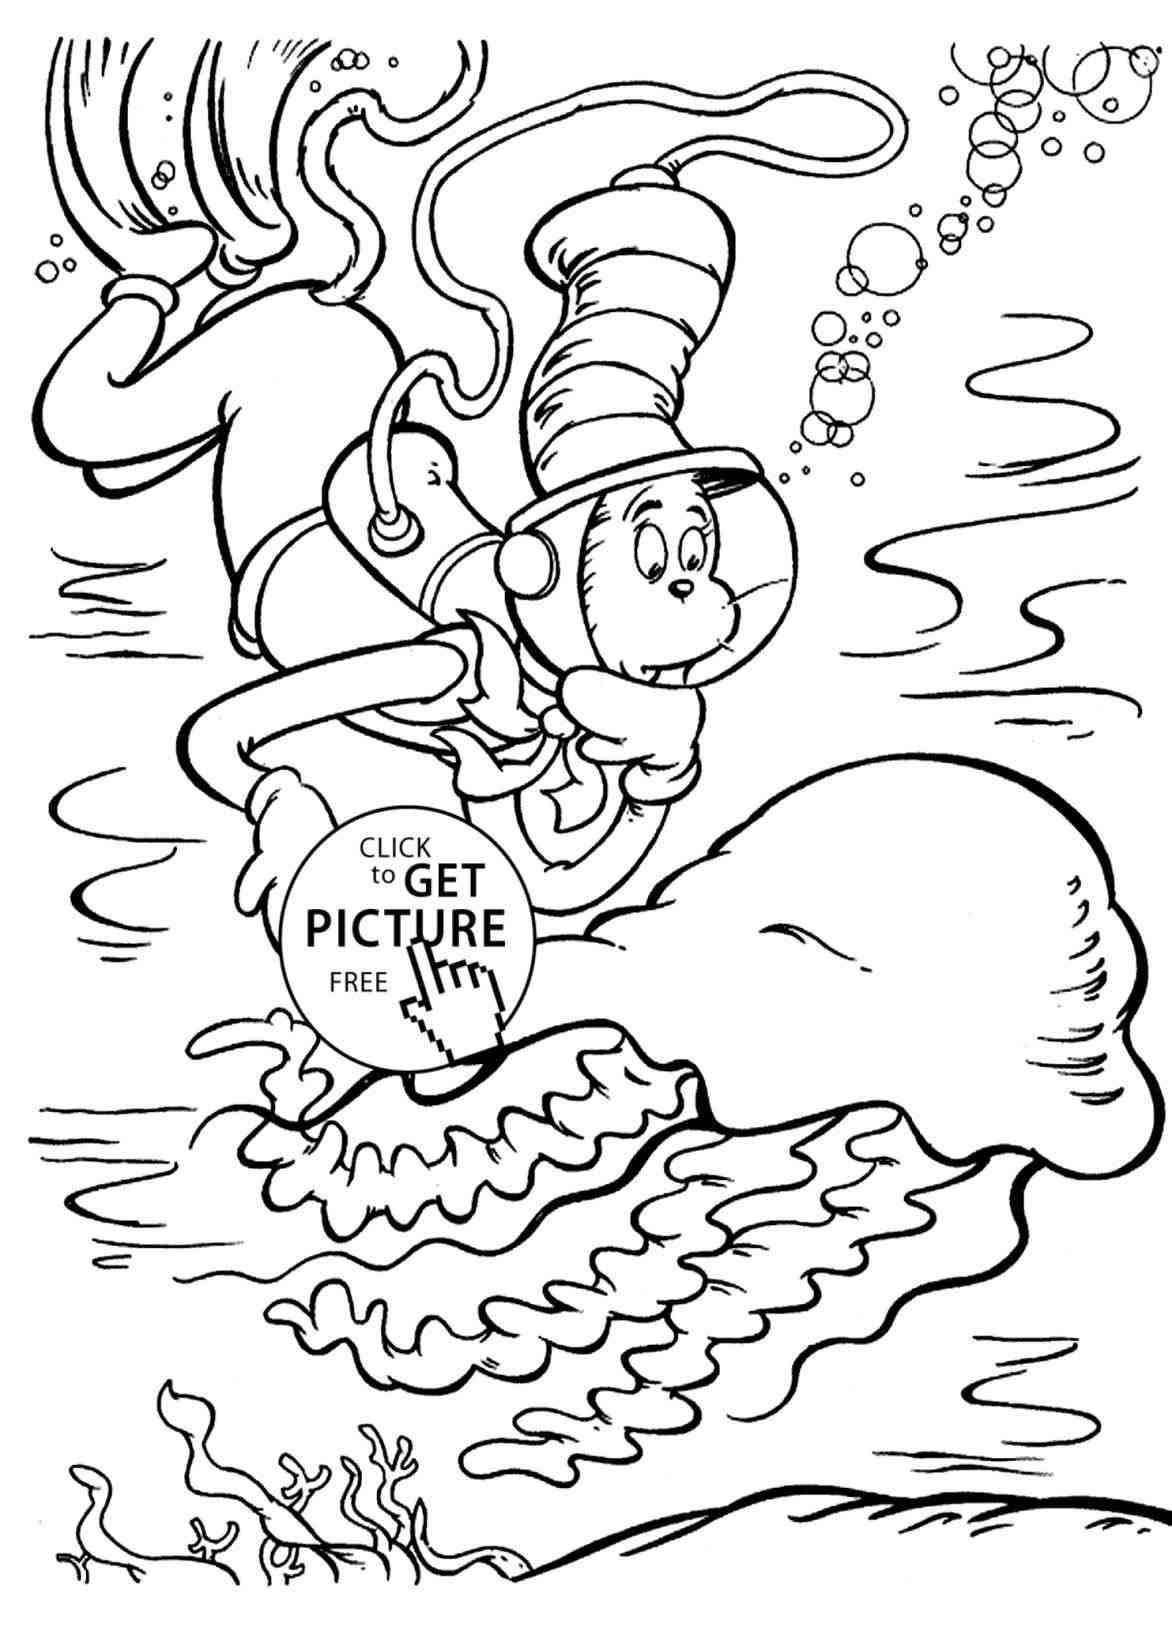 Bacon Coloring Page at GetColorings.com | Free printable colorings